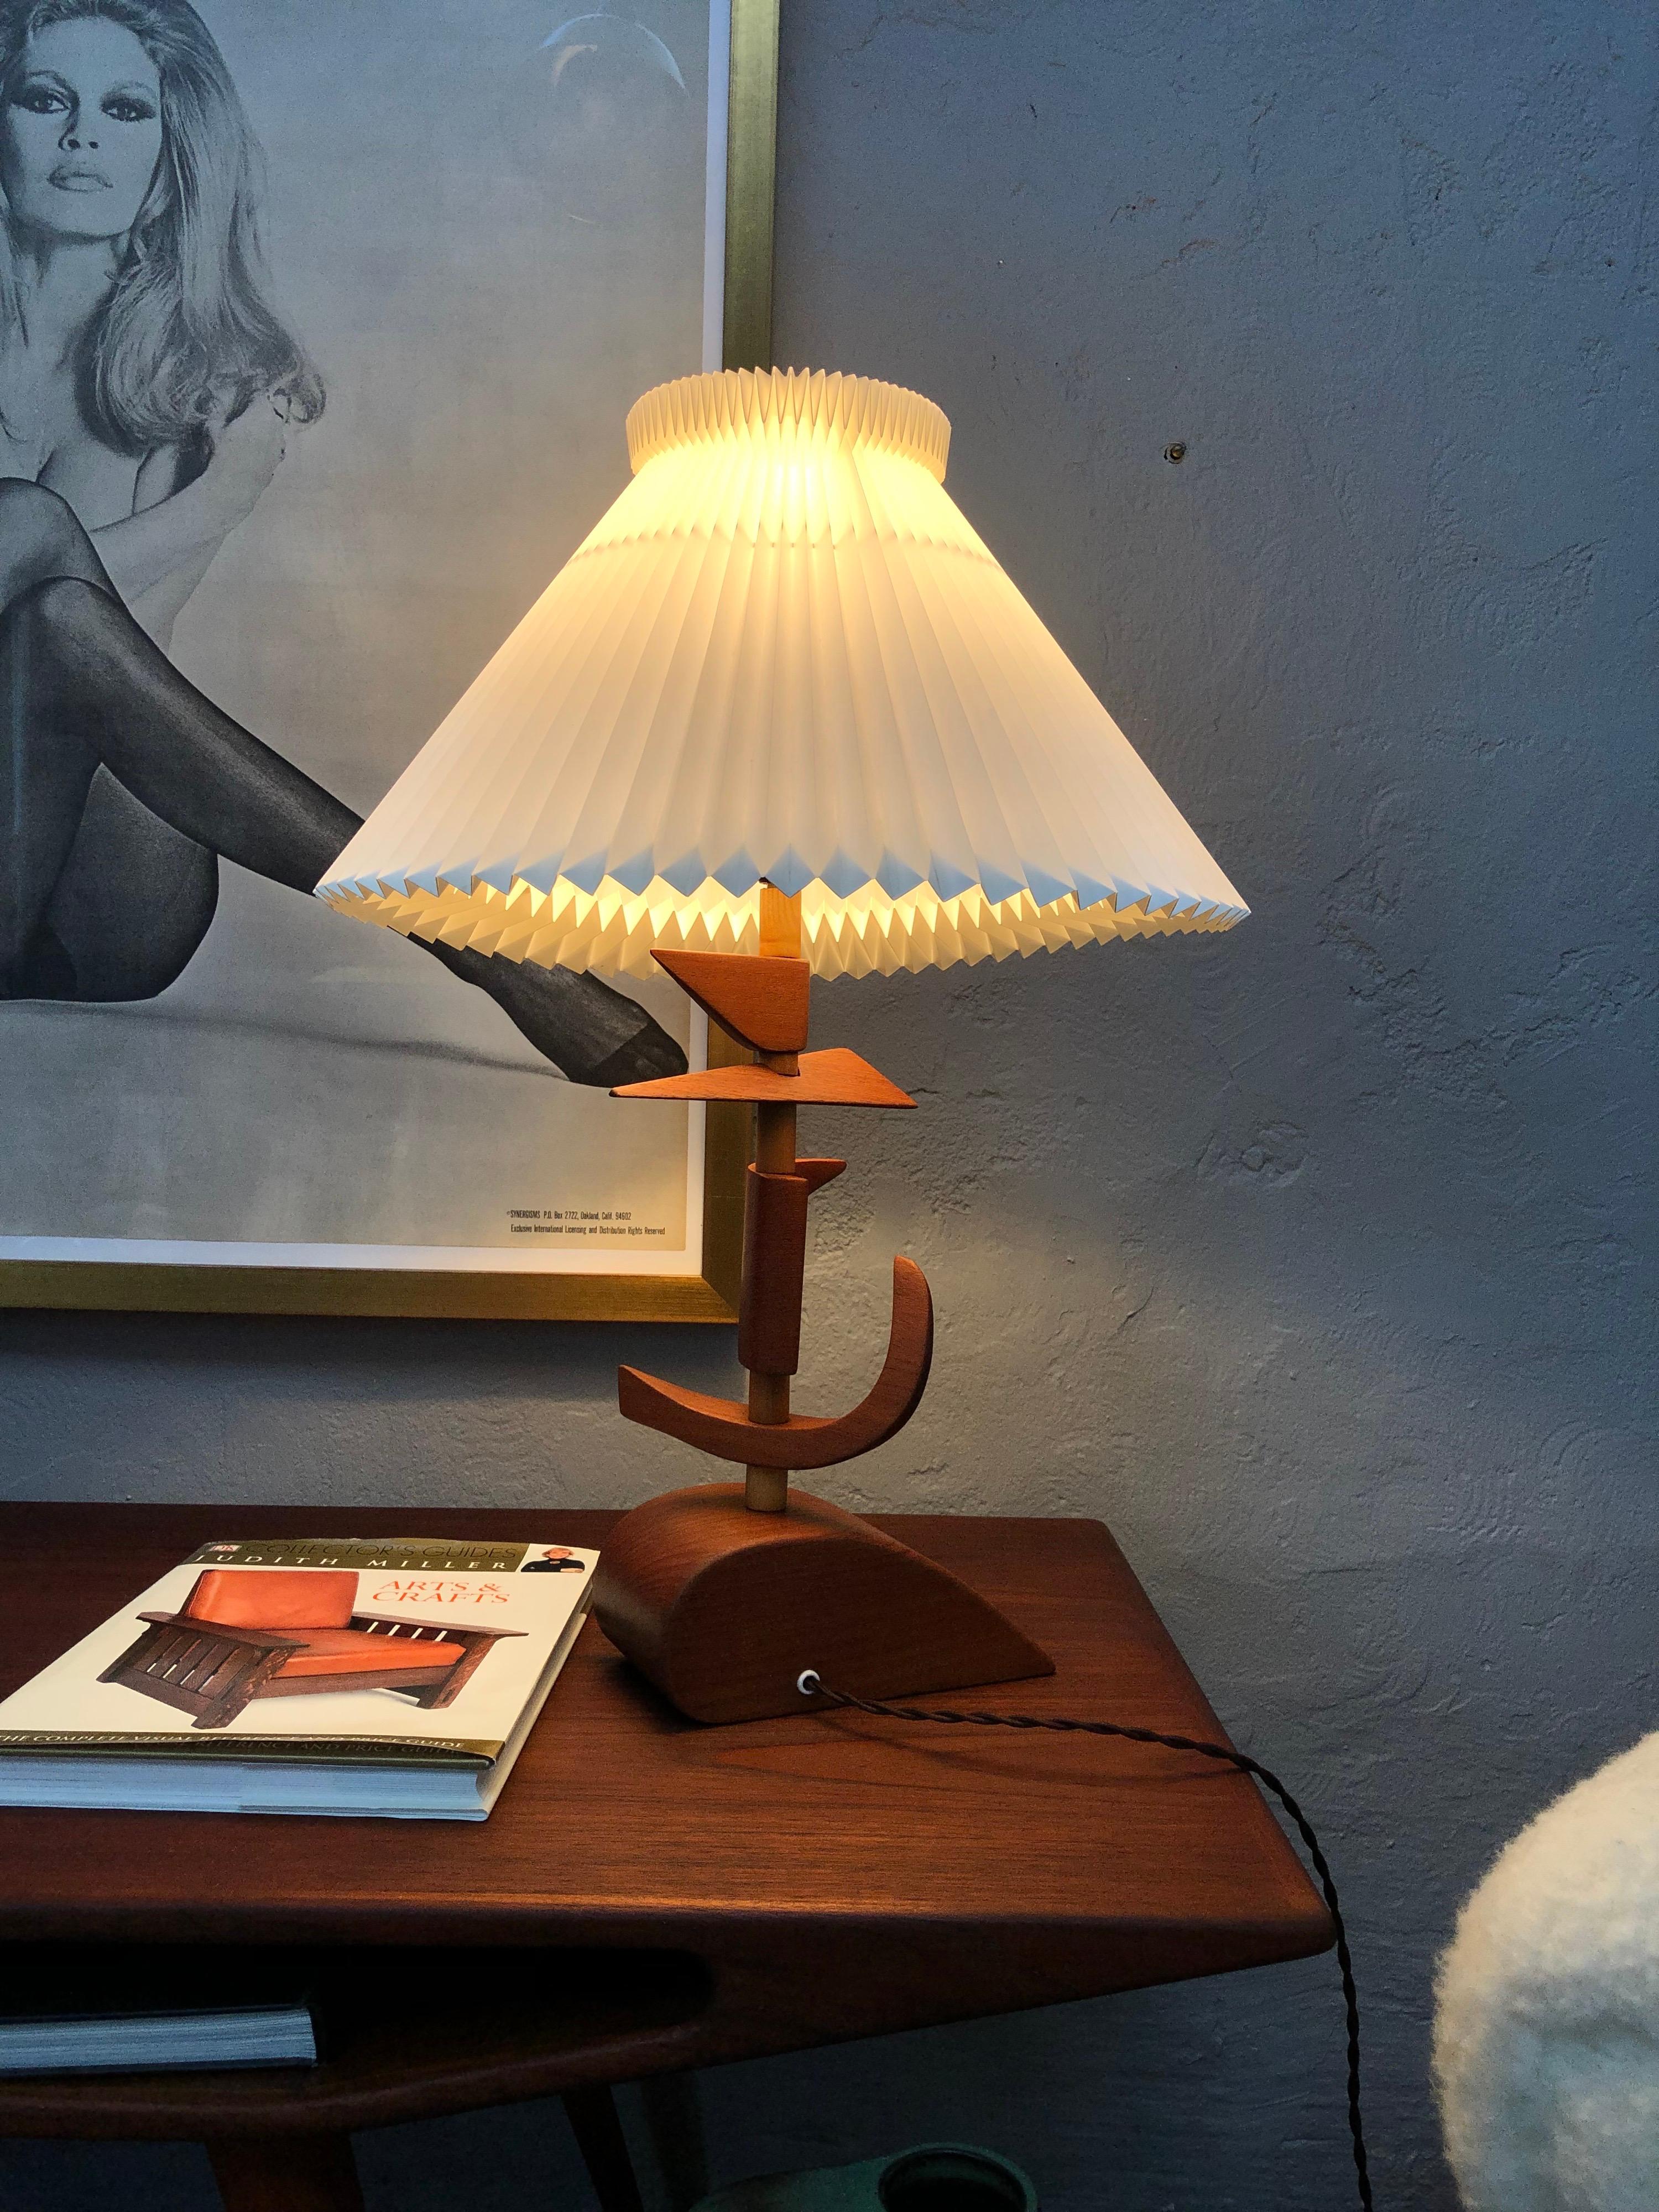 Vintage Mid-Century Modern Danish artisan prototype teak table lamp.
This is an amazing lamp that i immensely enjoyed renovating.
The lamp can only be one of two things. Either it is a prototype or a furniture maker has made it out of discarded teak